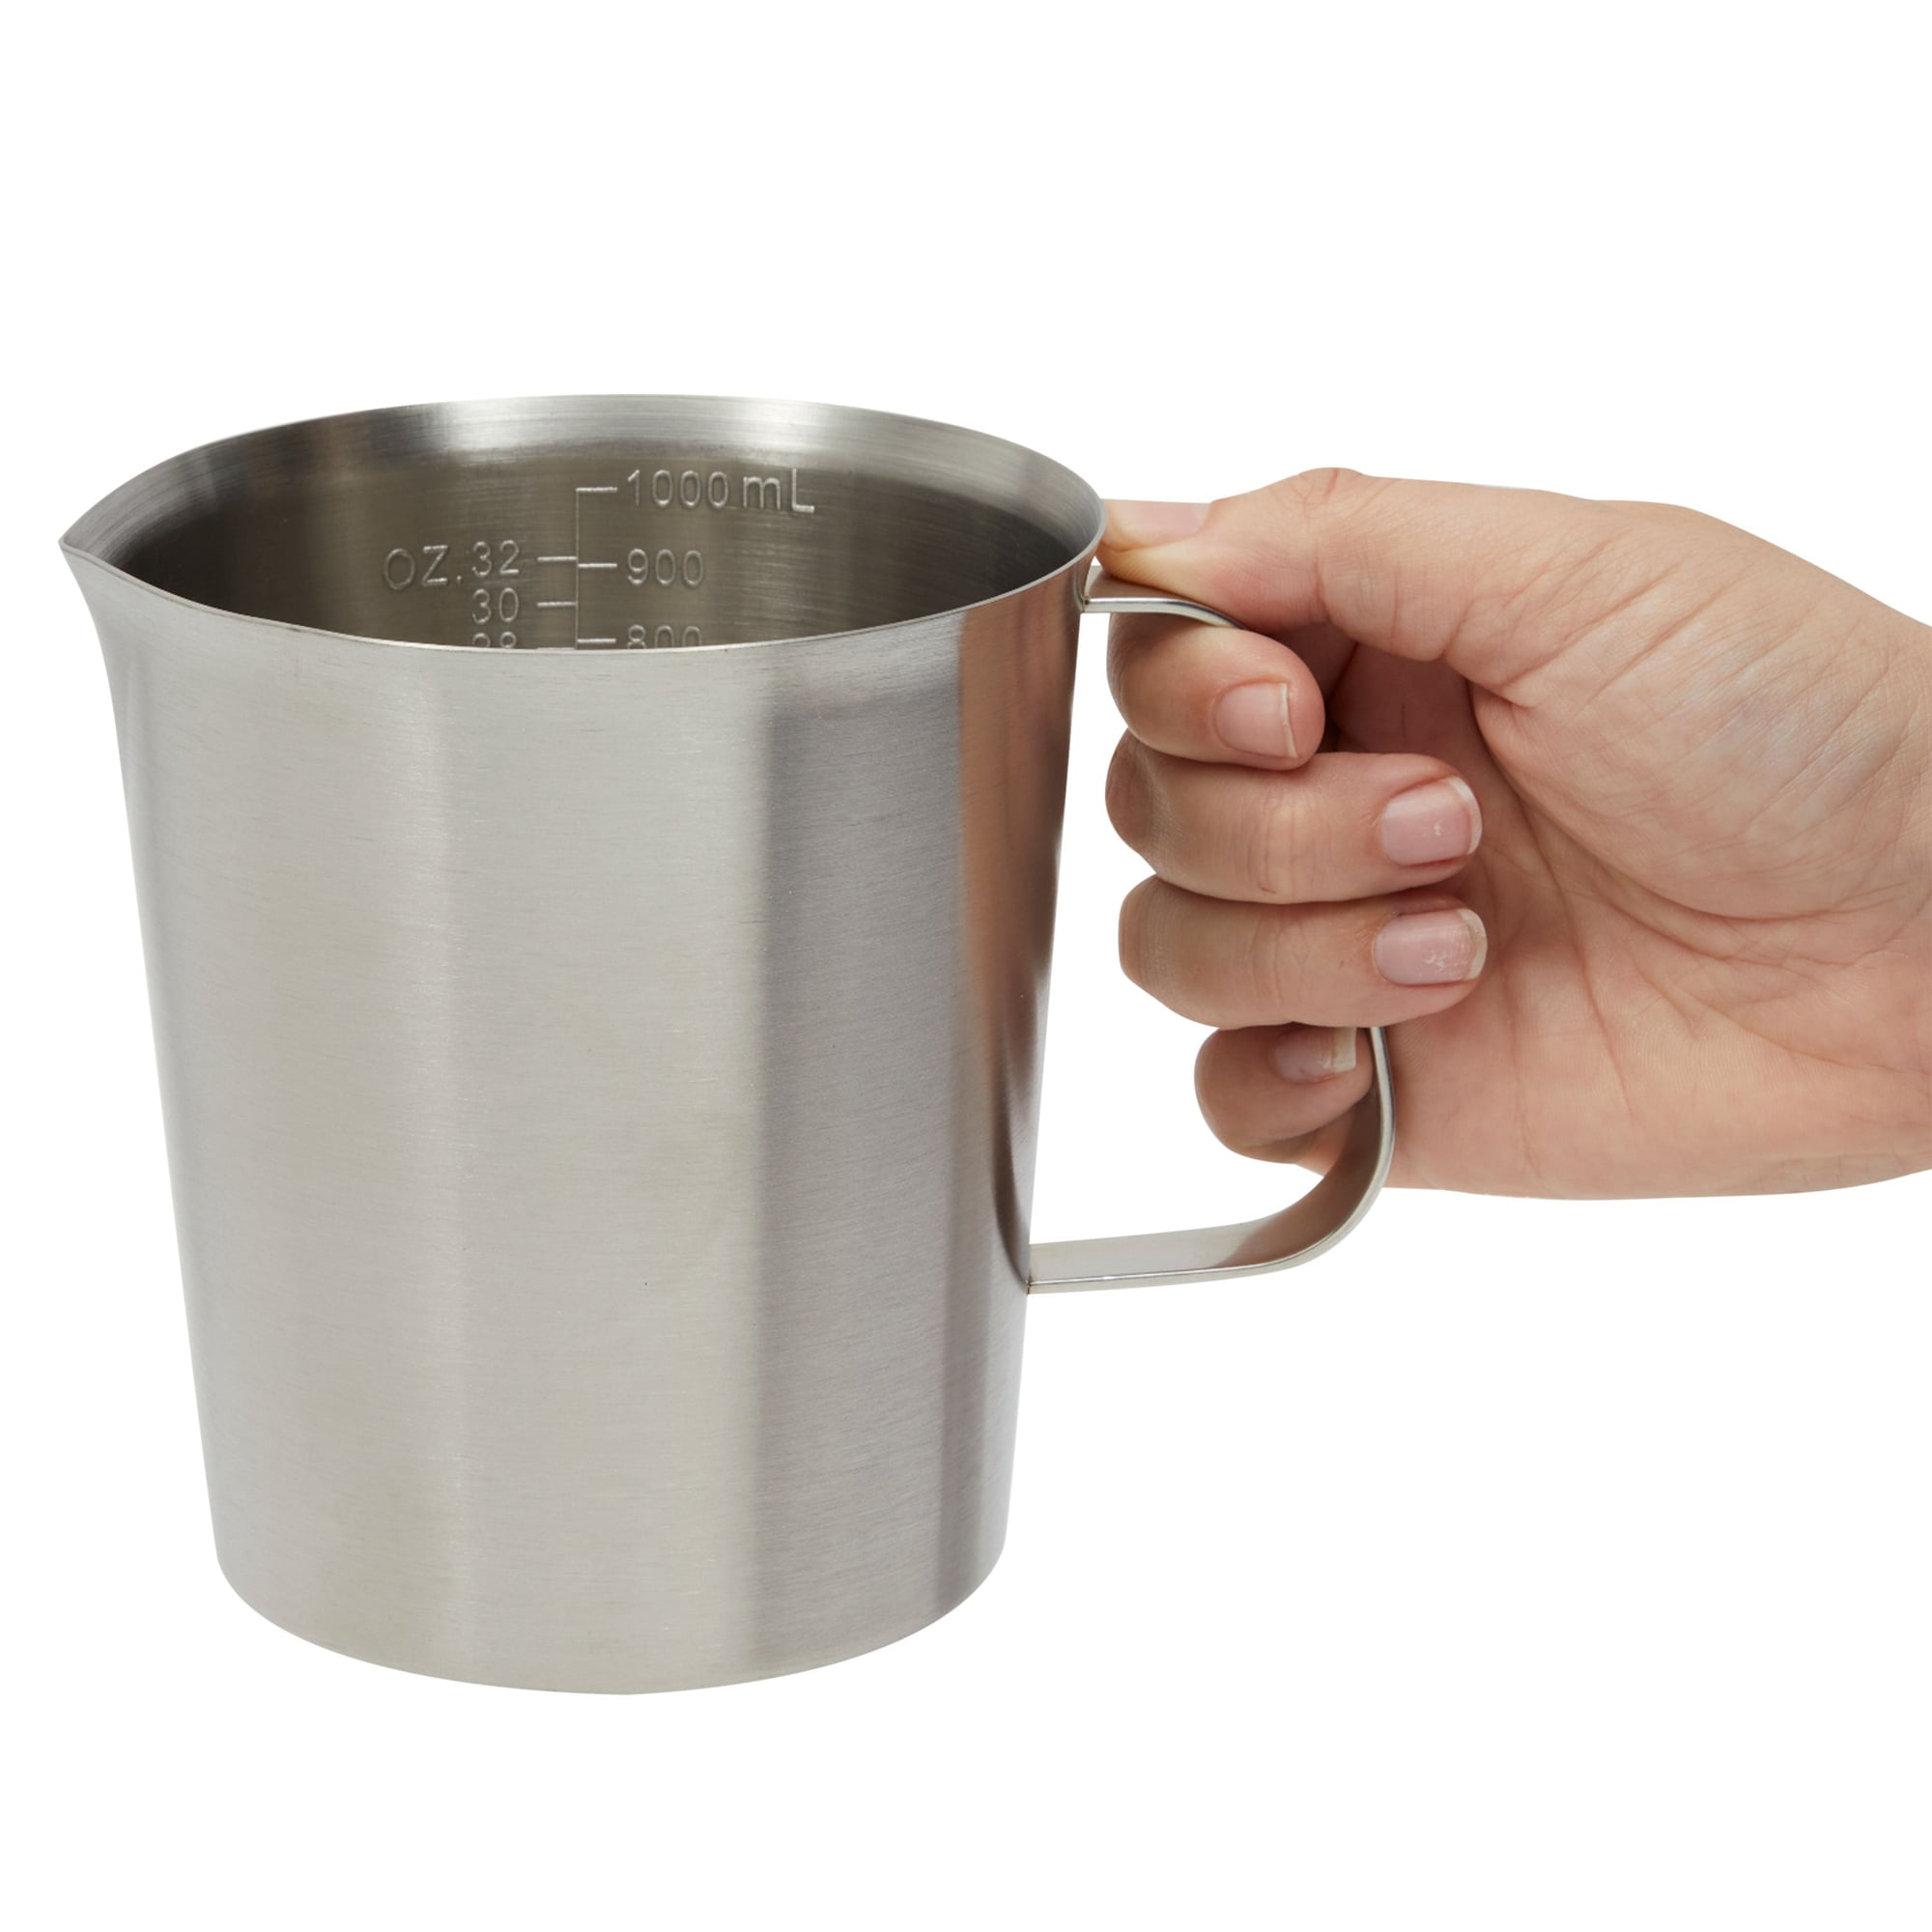 Measuring Cup, Newness Stainless Steel Measuring Cup with Marking with  Handle, 32 Ounces (1.0 Liter, 4 Cup)